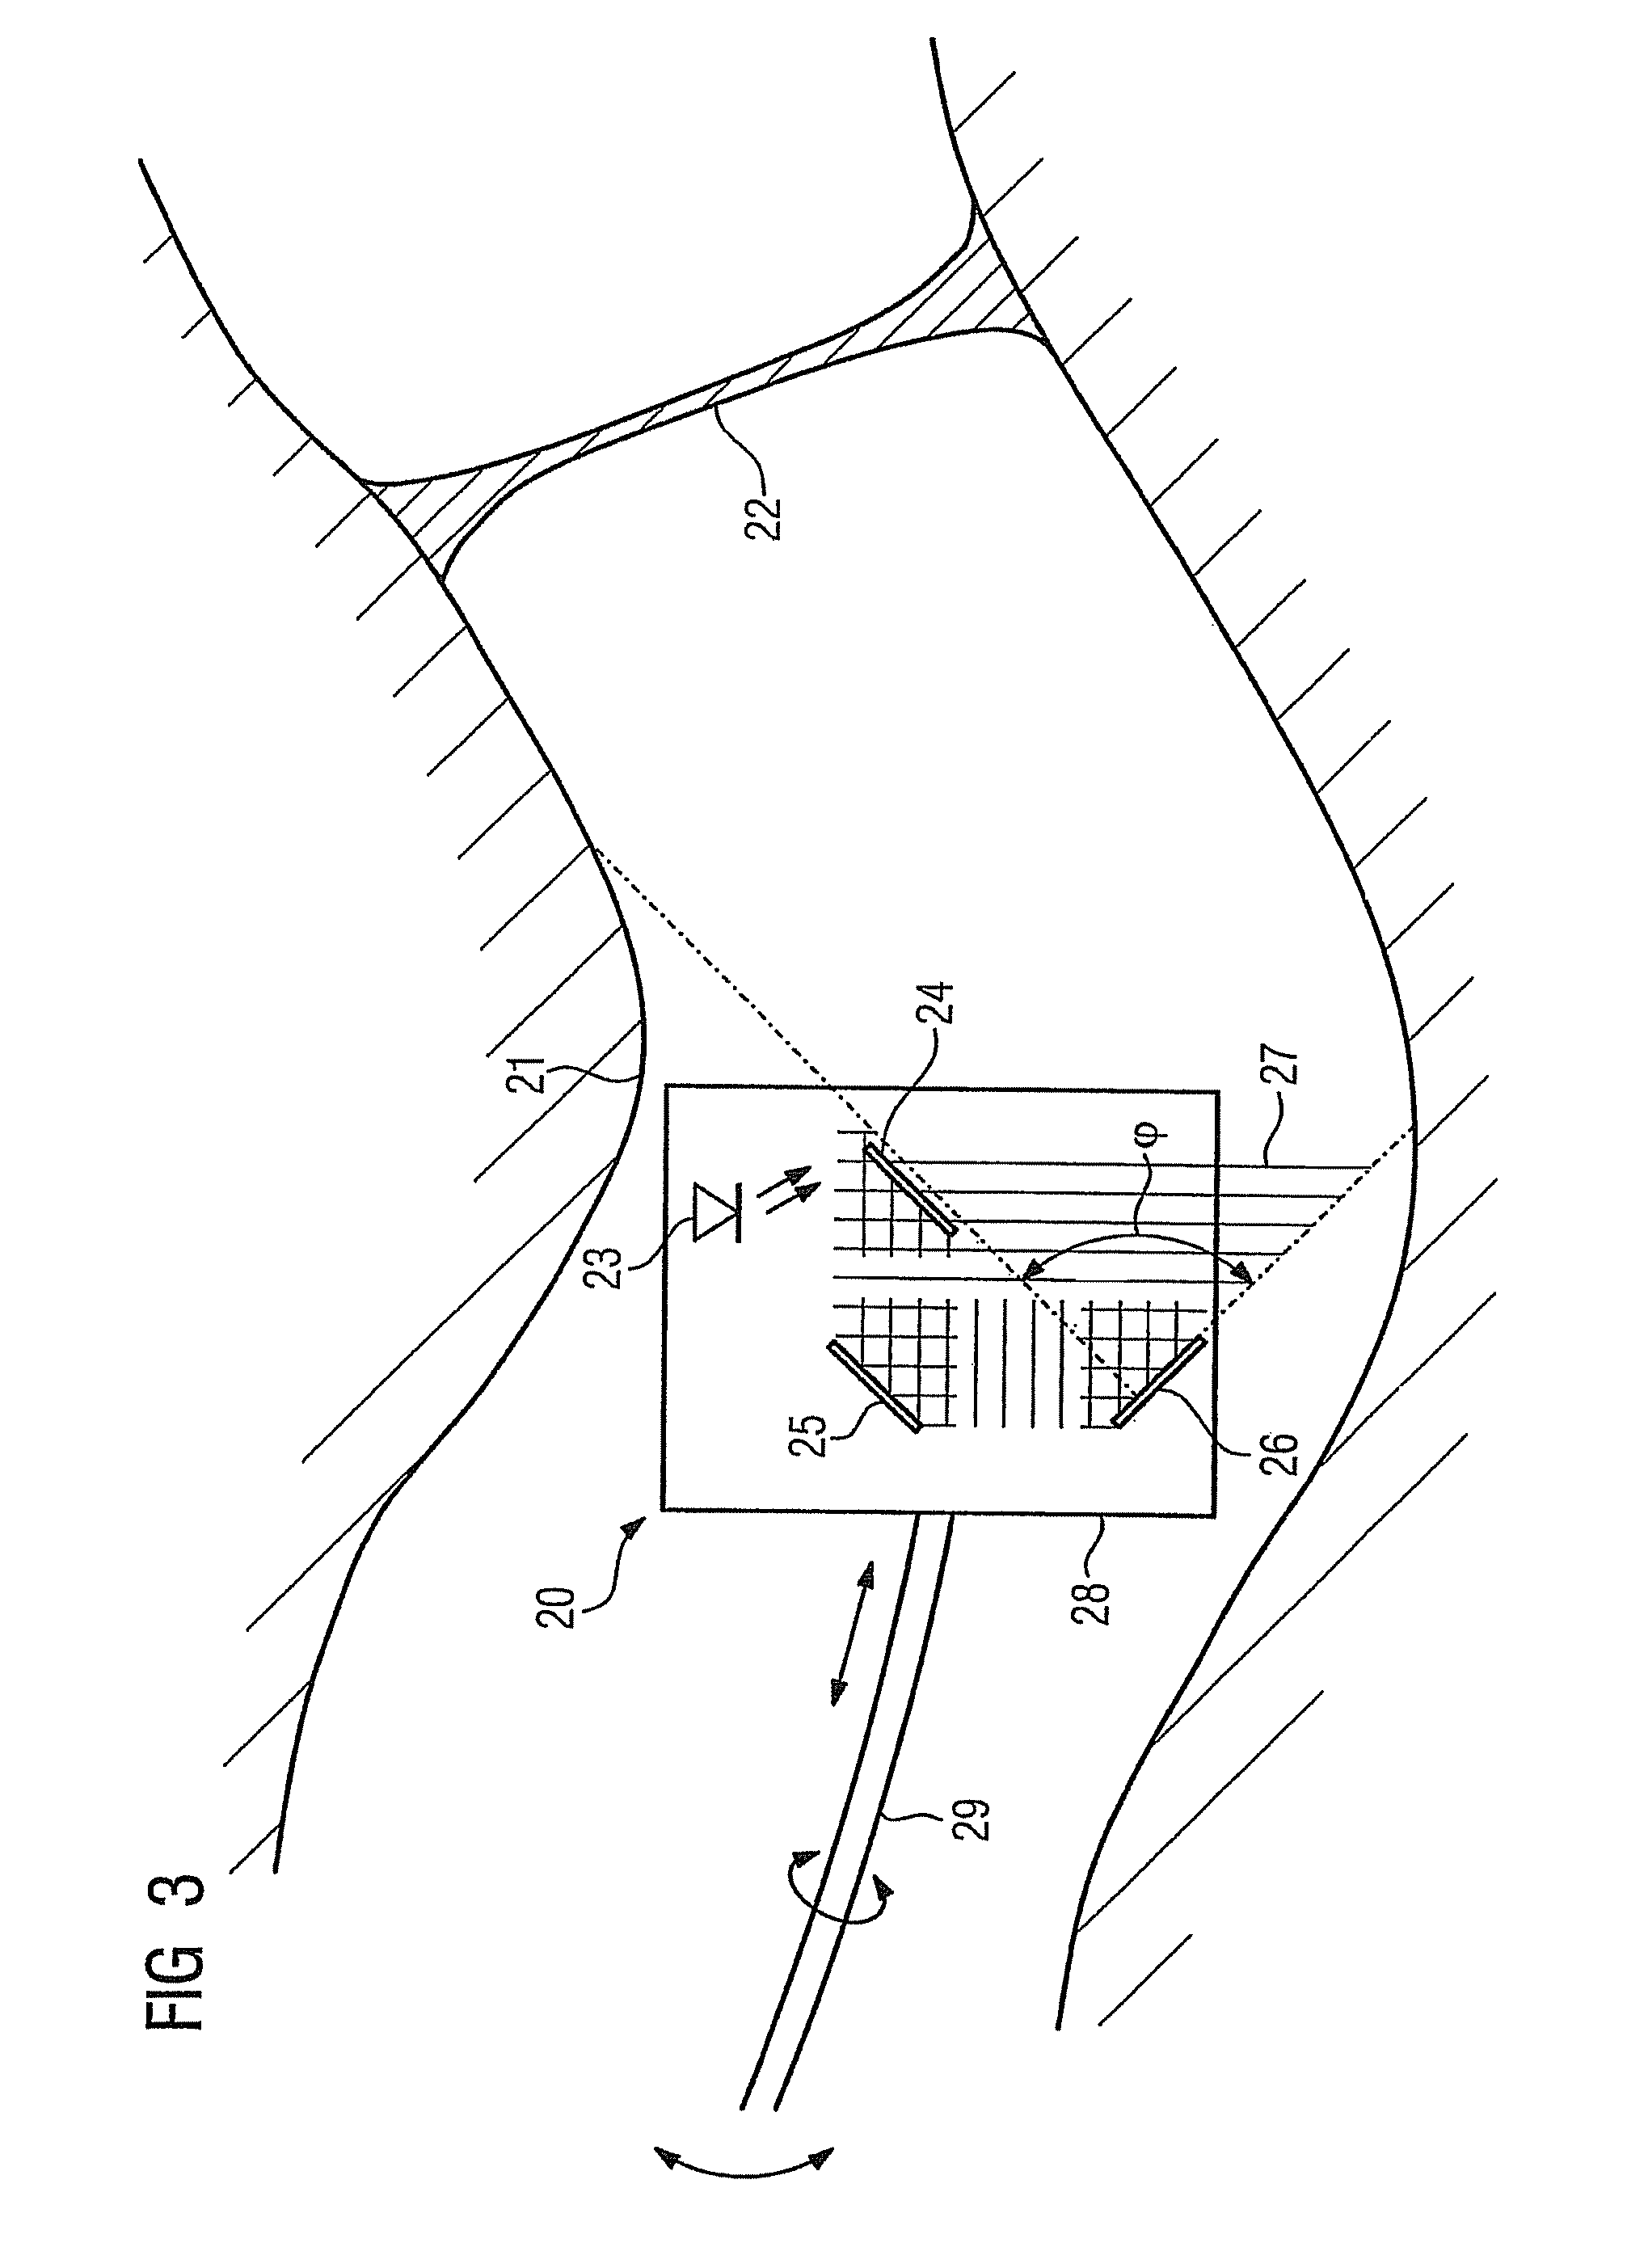 Ear canal hologram for hearing apparatuses